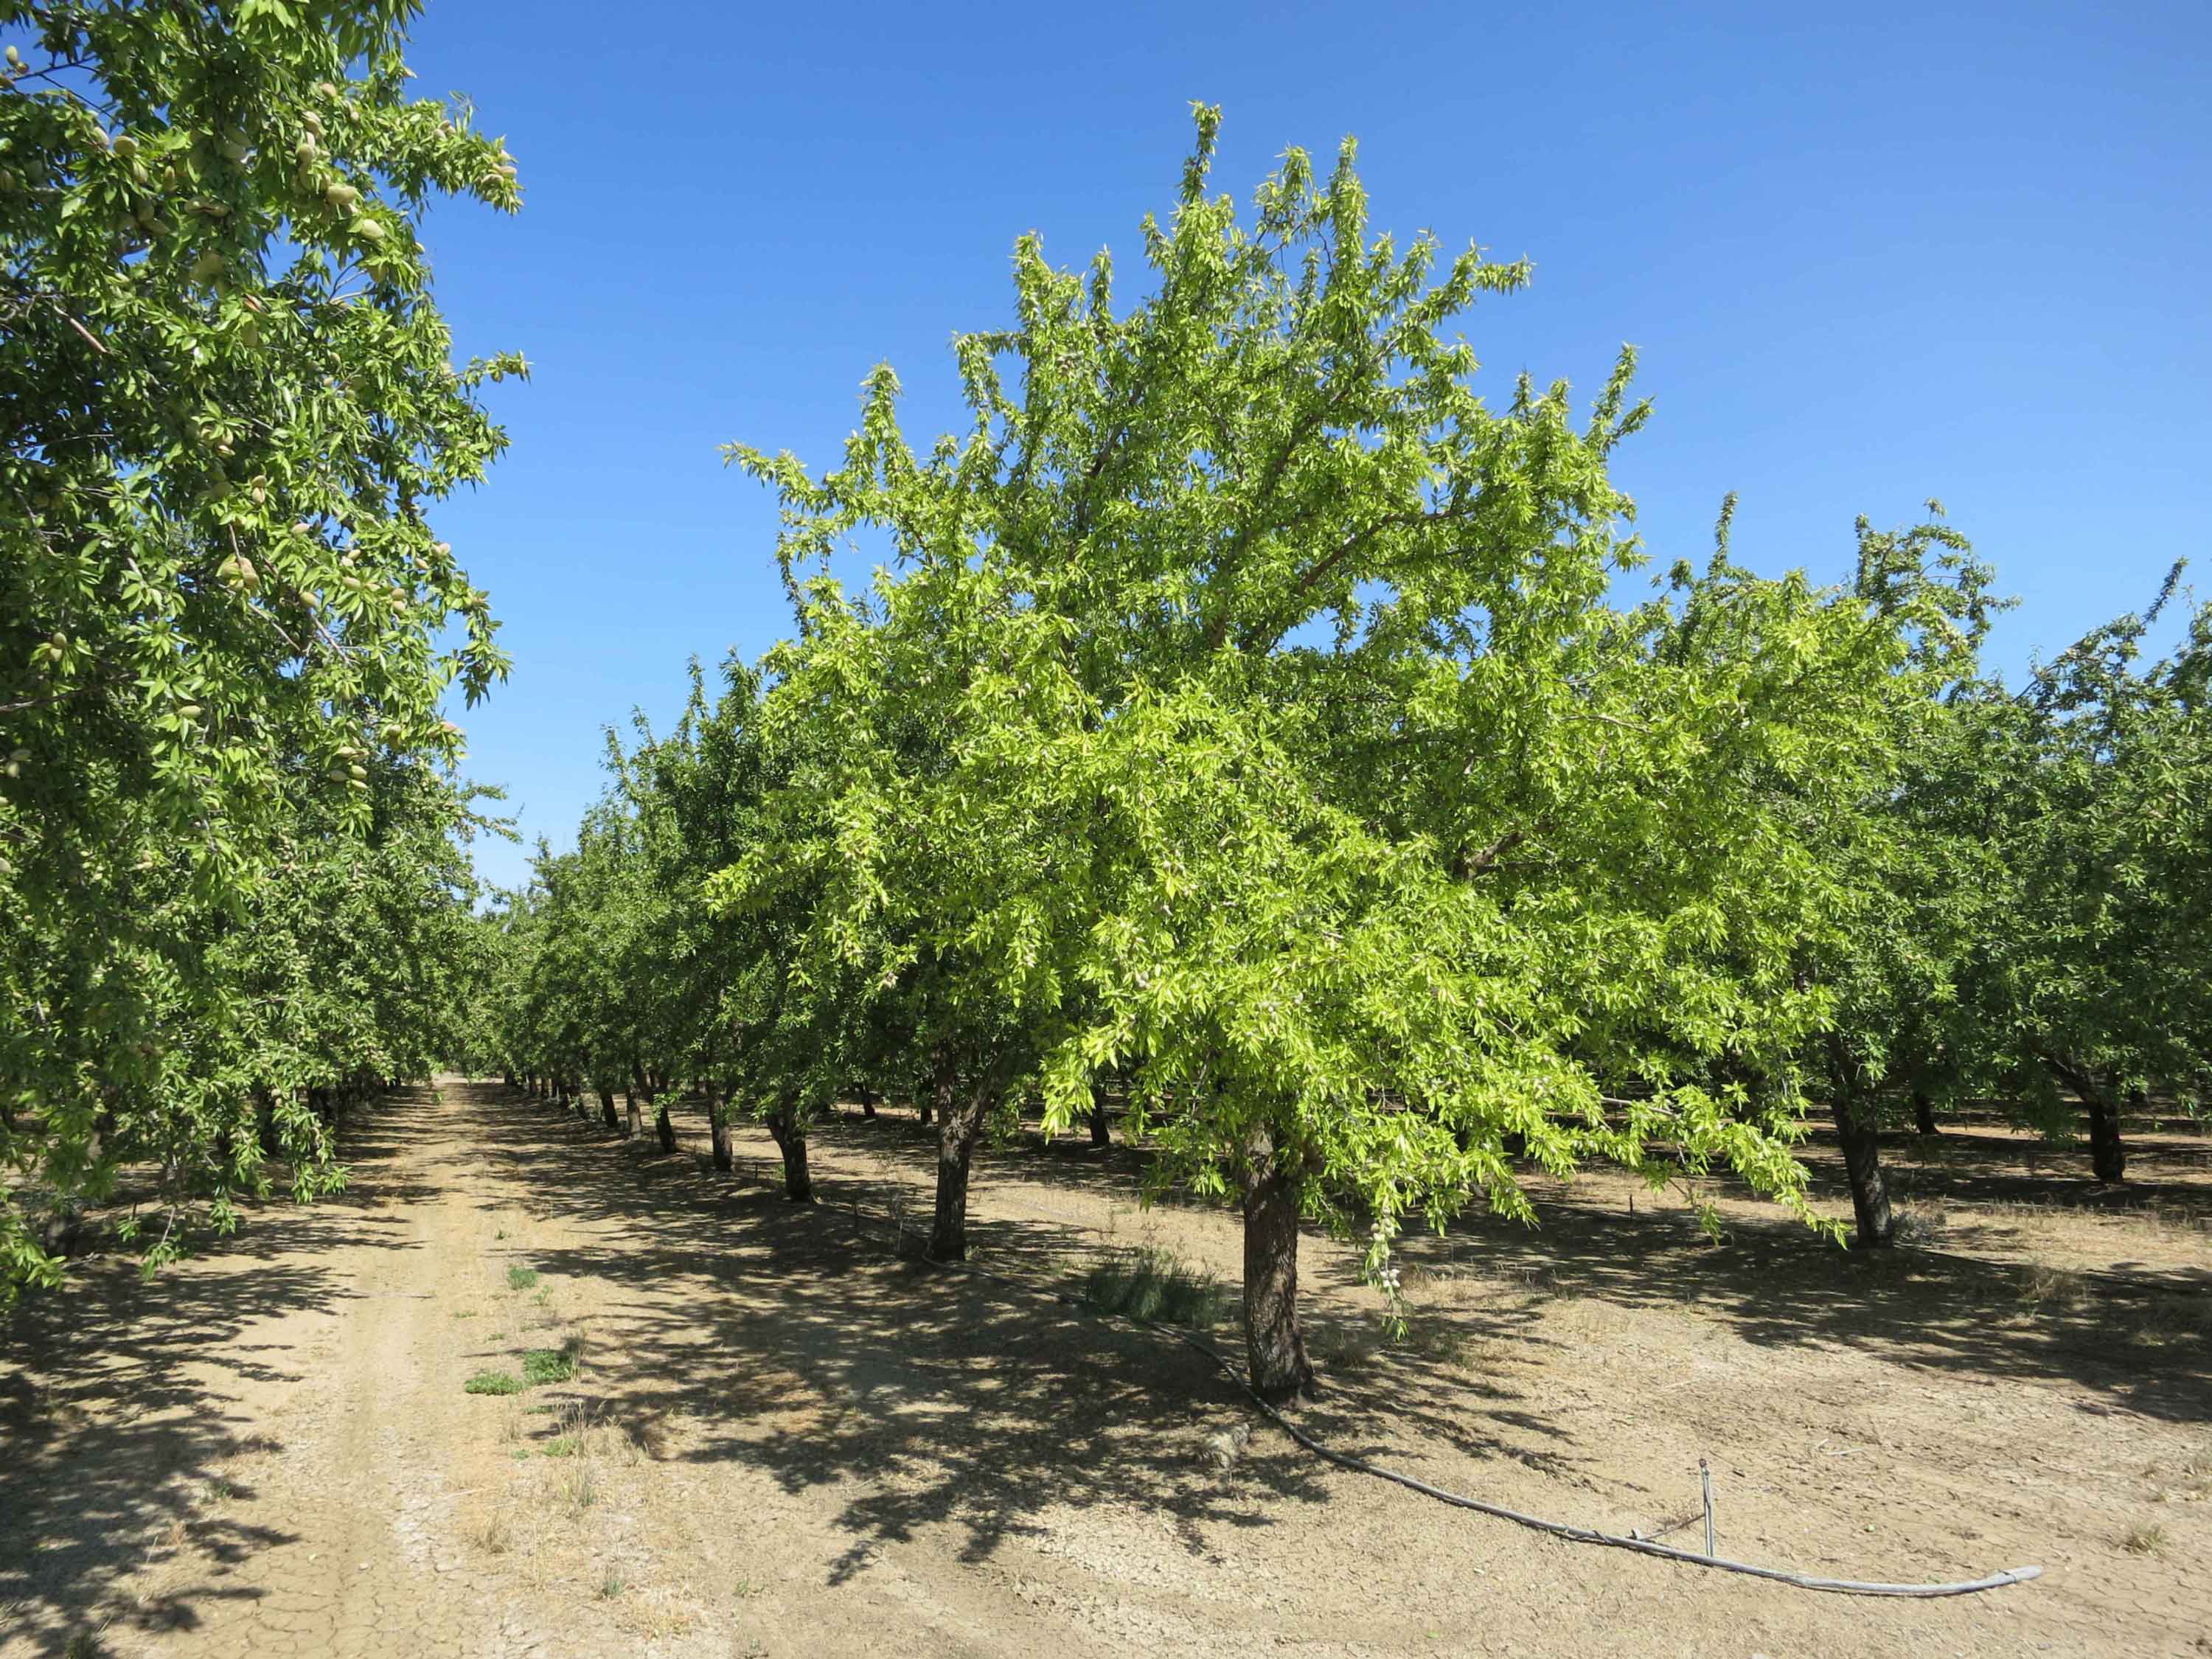 Distribution of Chlorosis in Almond Orchards